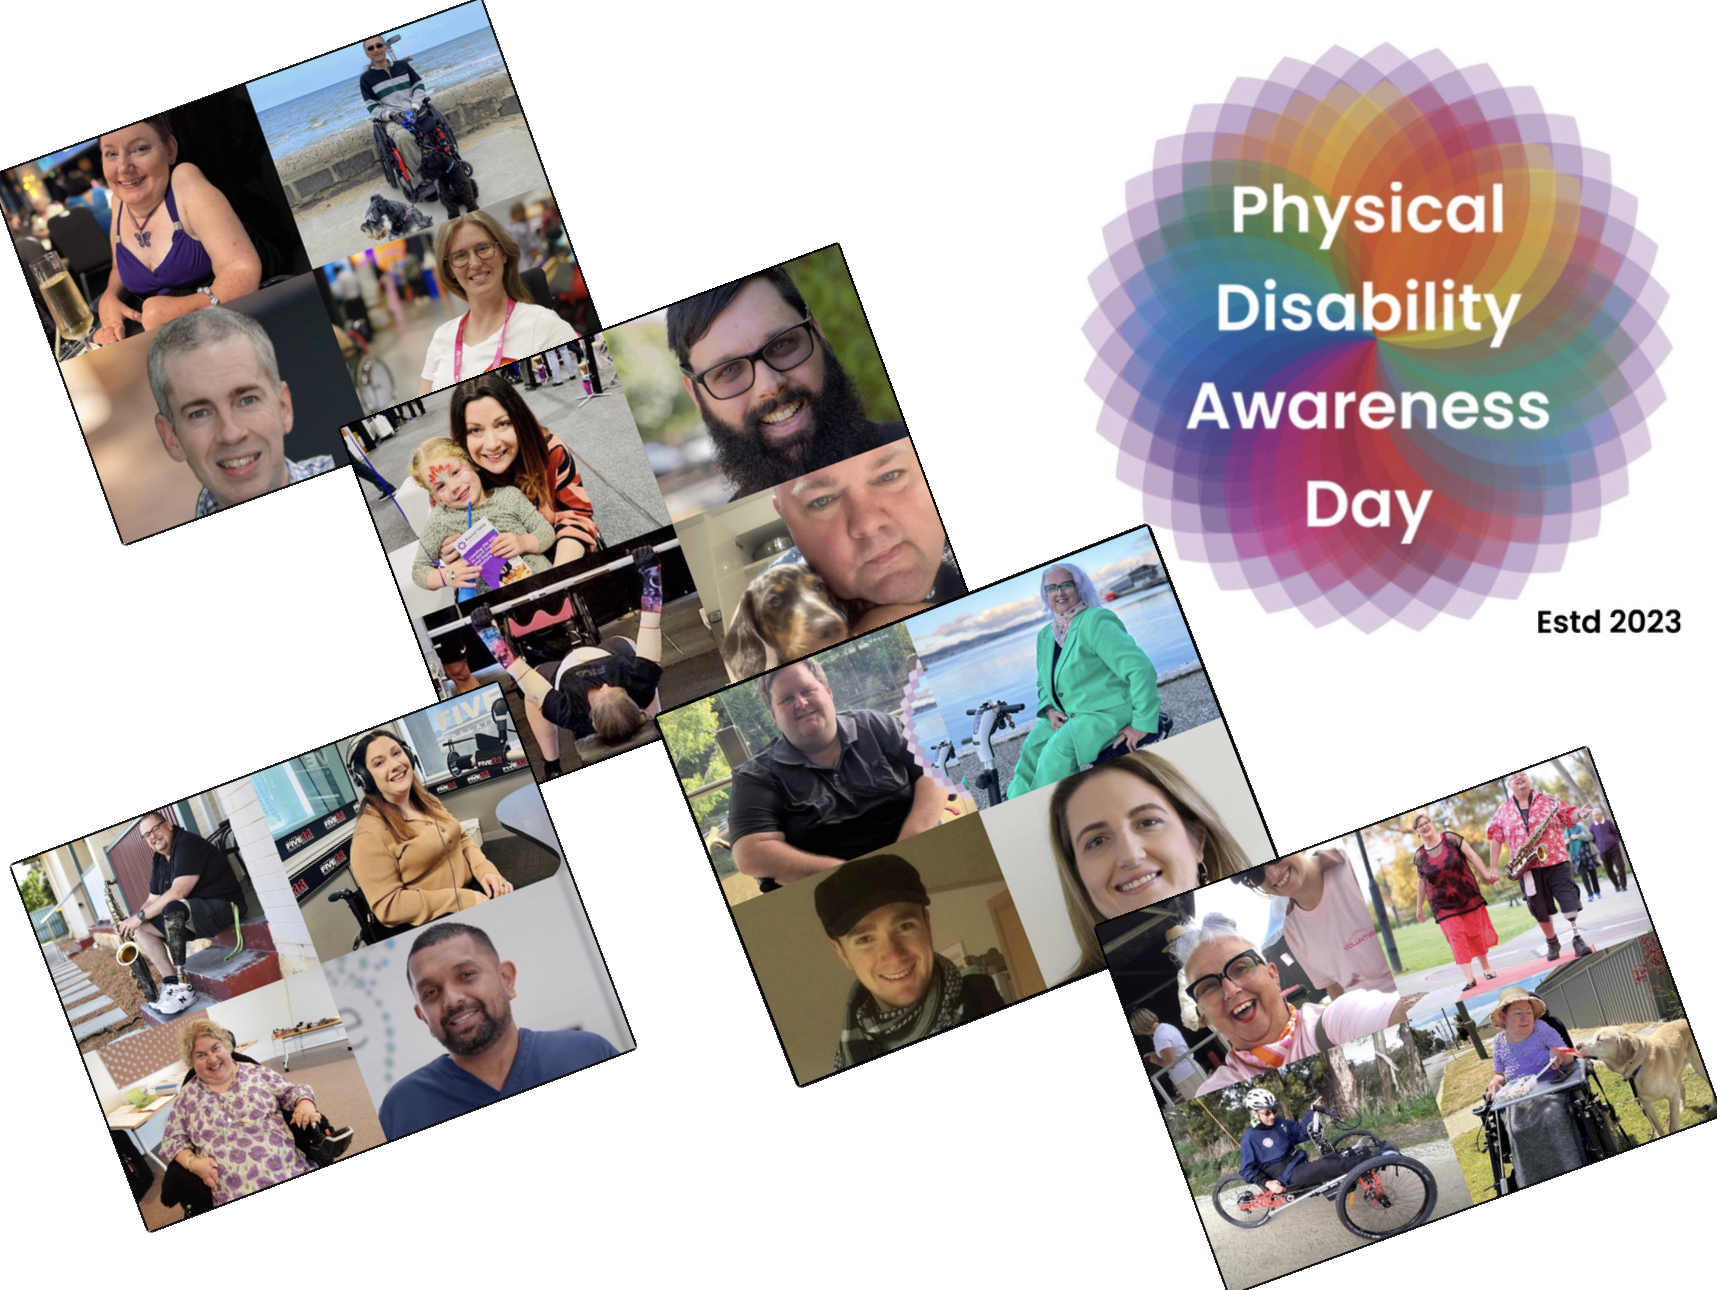 Celebrating and recognising the achievements and contributions of people living with physical disability.